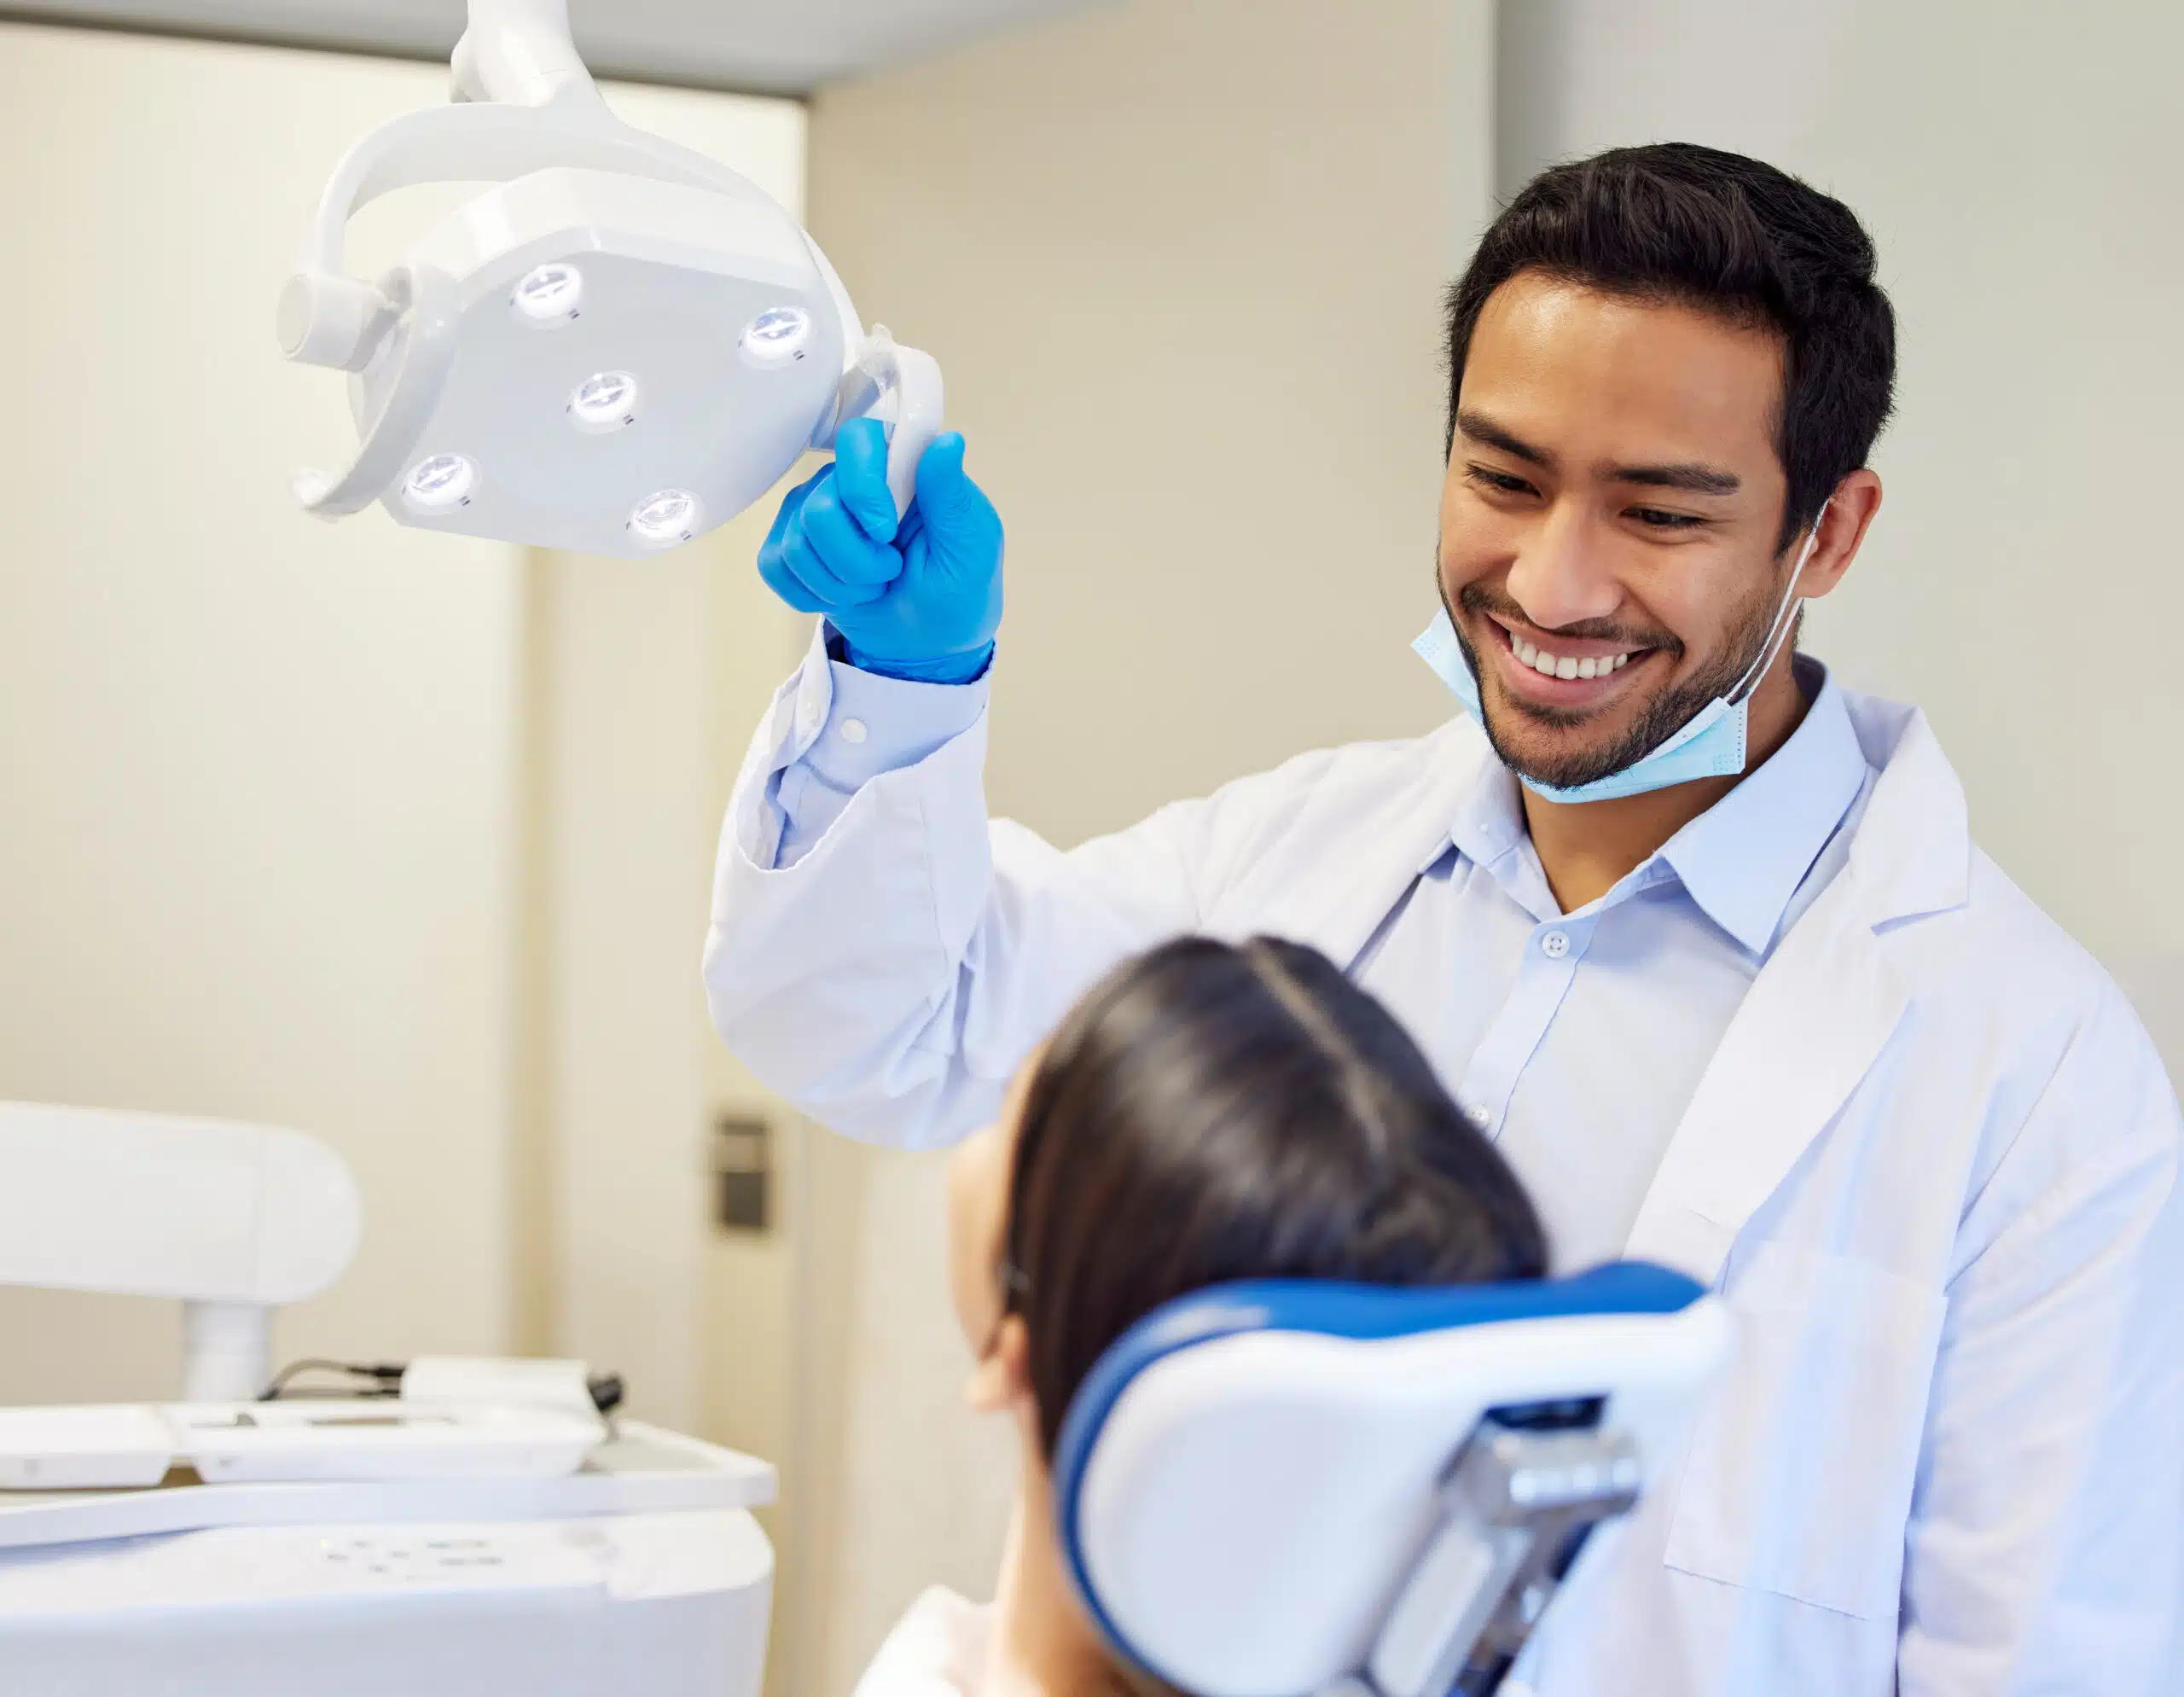 Our state-of-the-art laser technology allows us to provide pain-free dental care without the need for shots or drills.